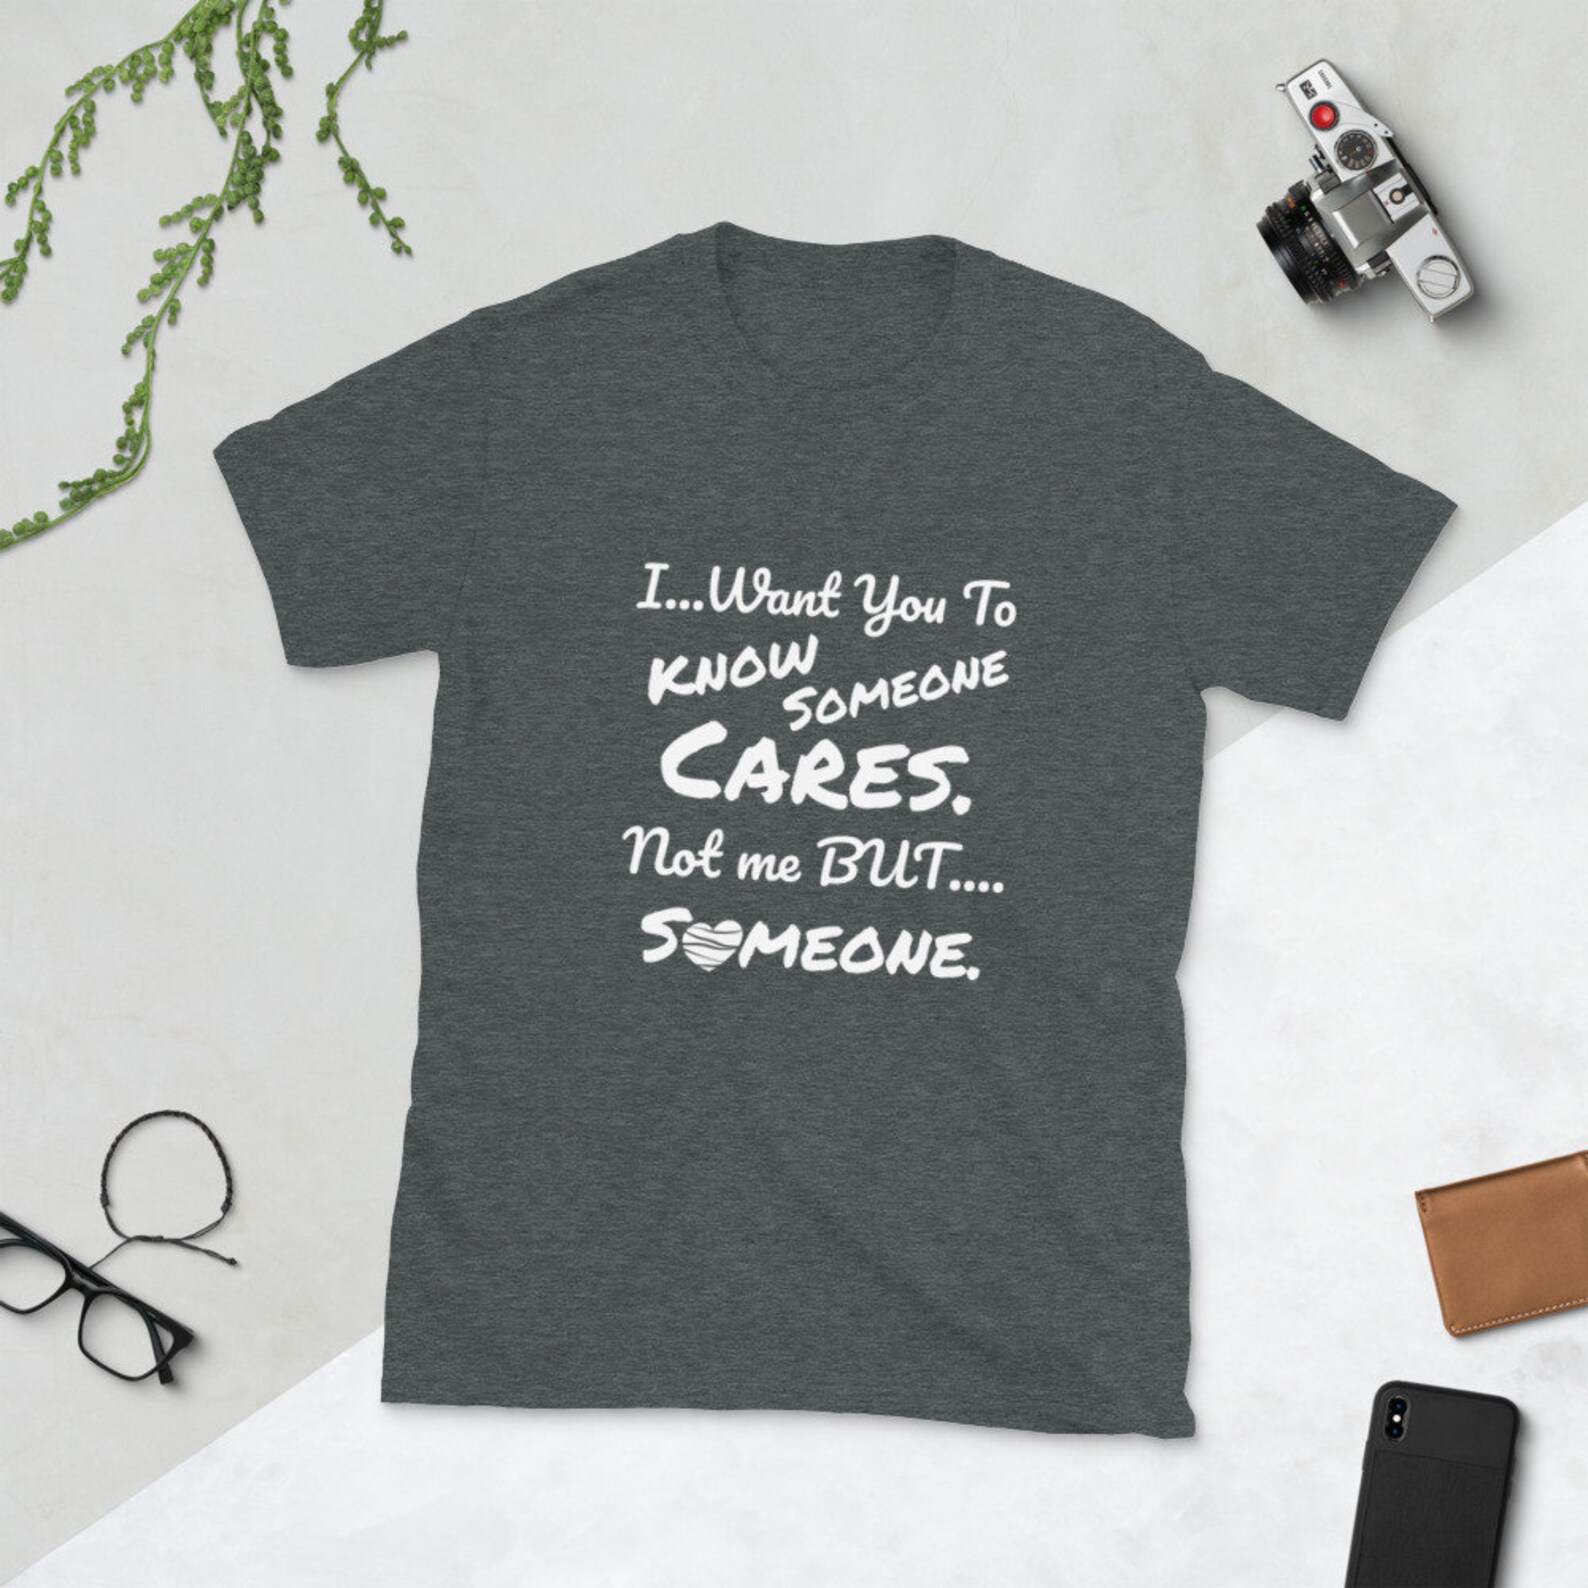 I Want You To Know Someone Cares. Not Me But SomeoneT-Shirt | Etsy